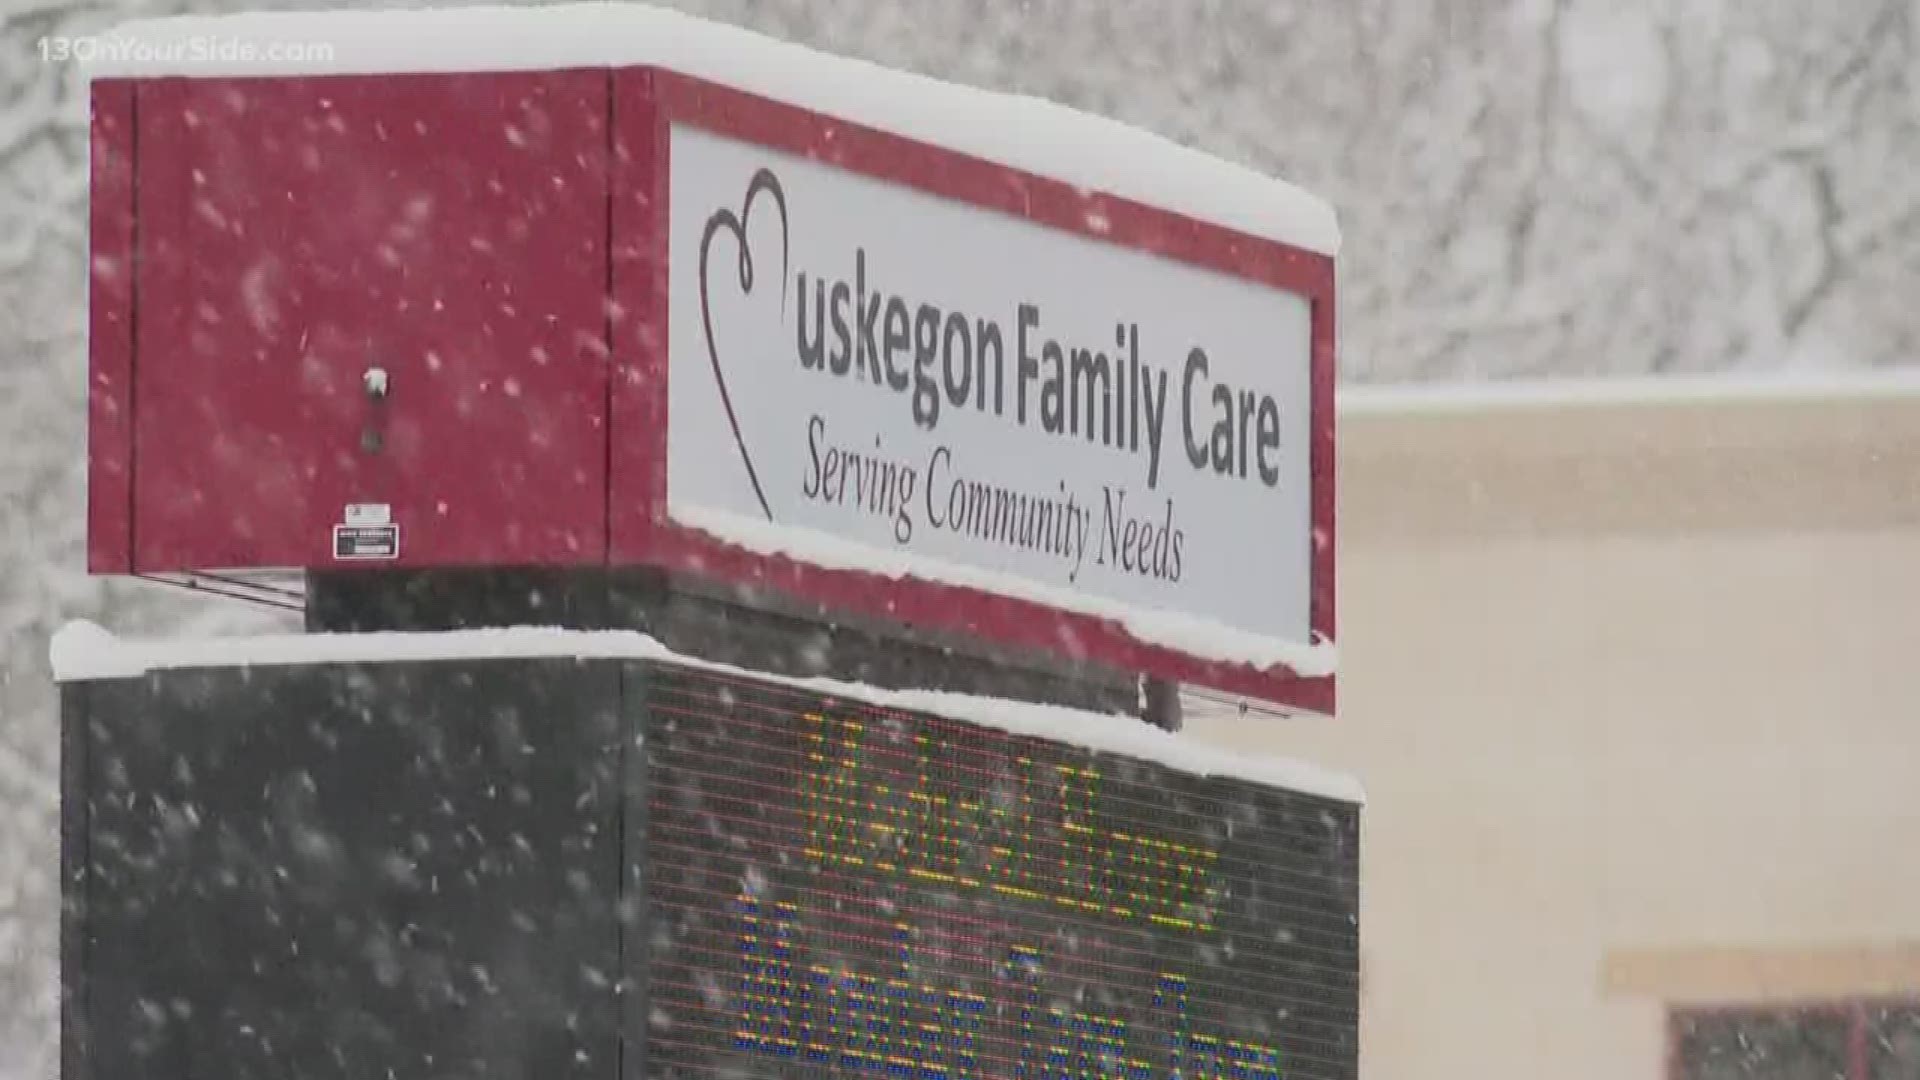 Patients showing up for previously scheduled appointment at Muskegon Family Care in Muskegon Heights were told Friday, Feb. 14 the facility is closing.